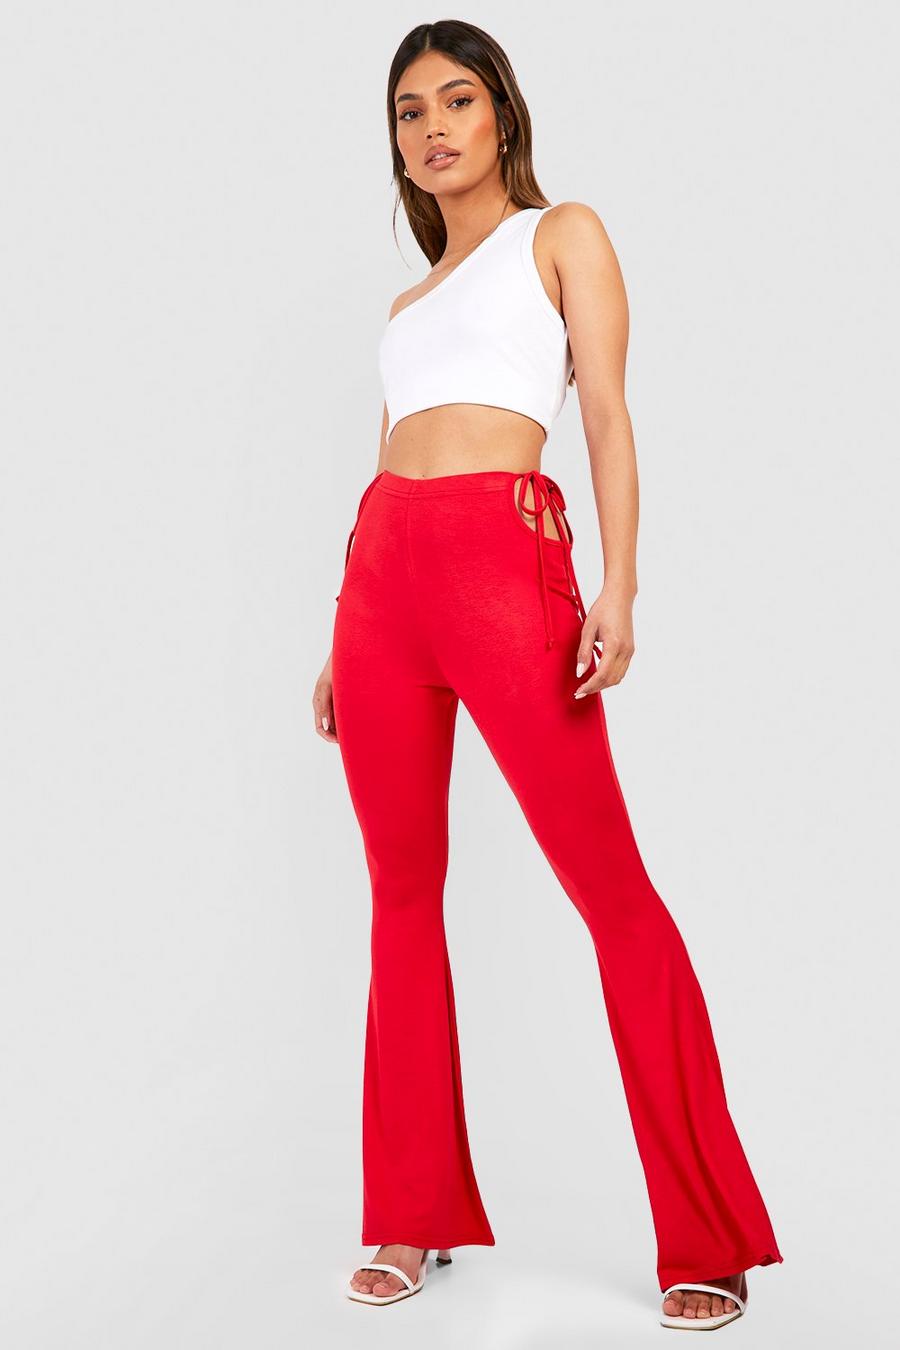 Red Jersey Knit Tie Side Flared Pants